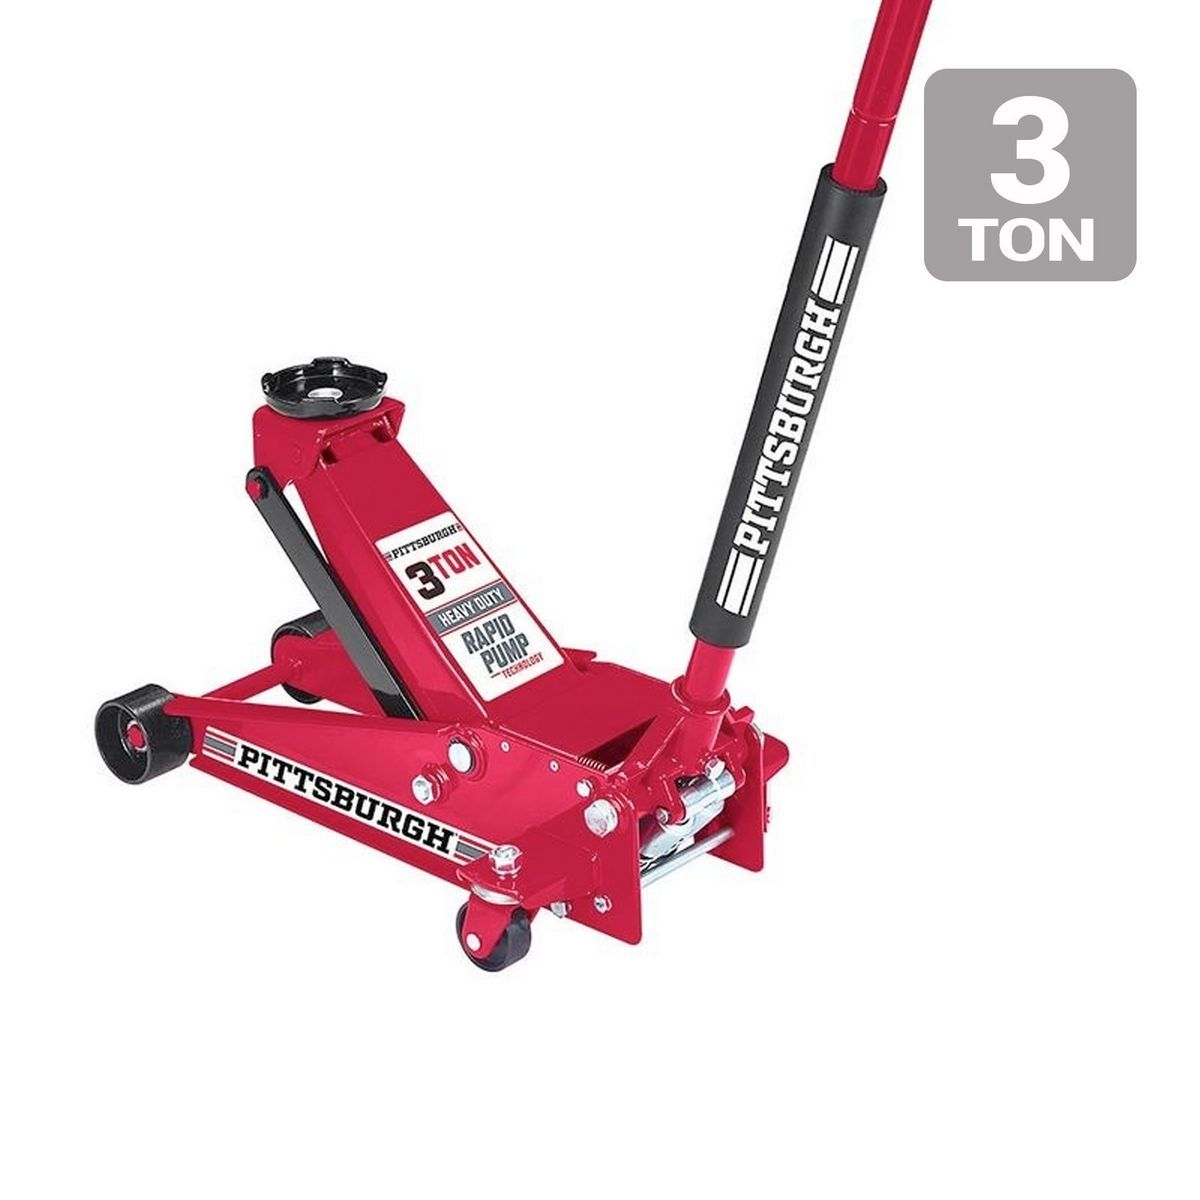 3 ton Floor Jack with RAPID PUMP on Sale At Harbor Freight Tools